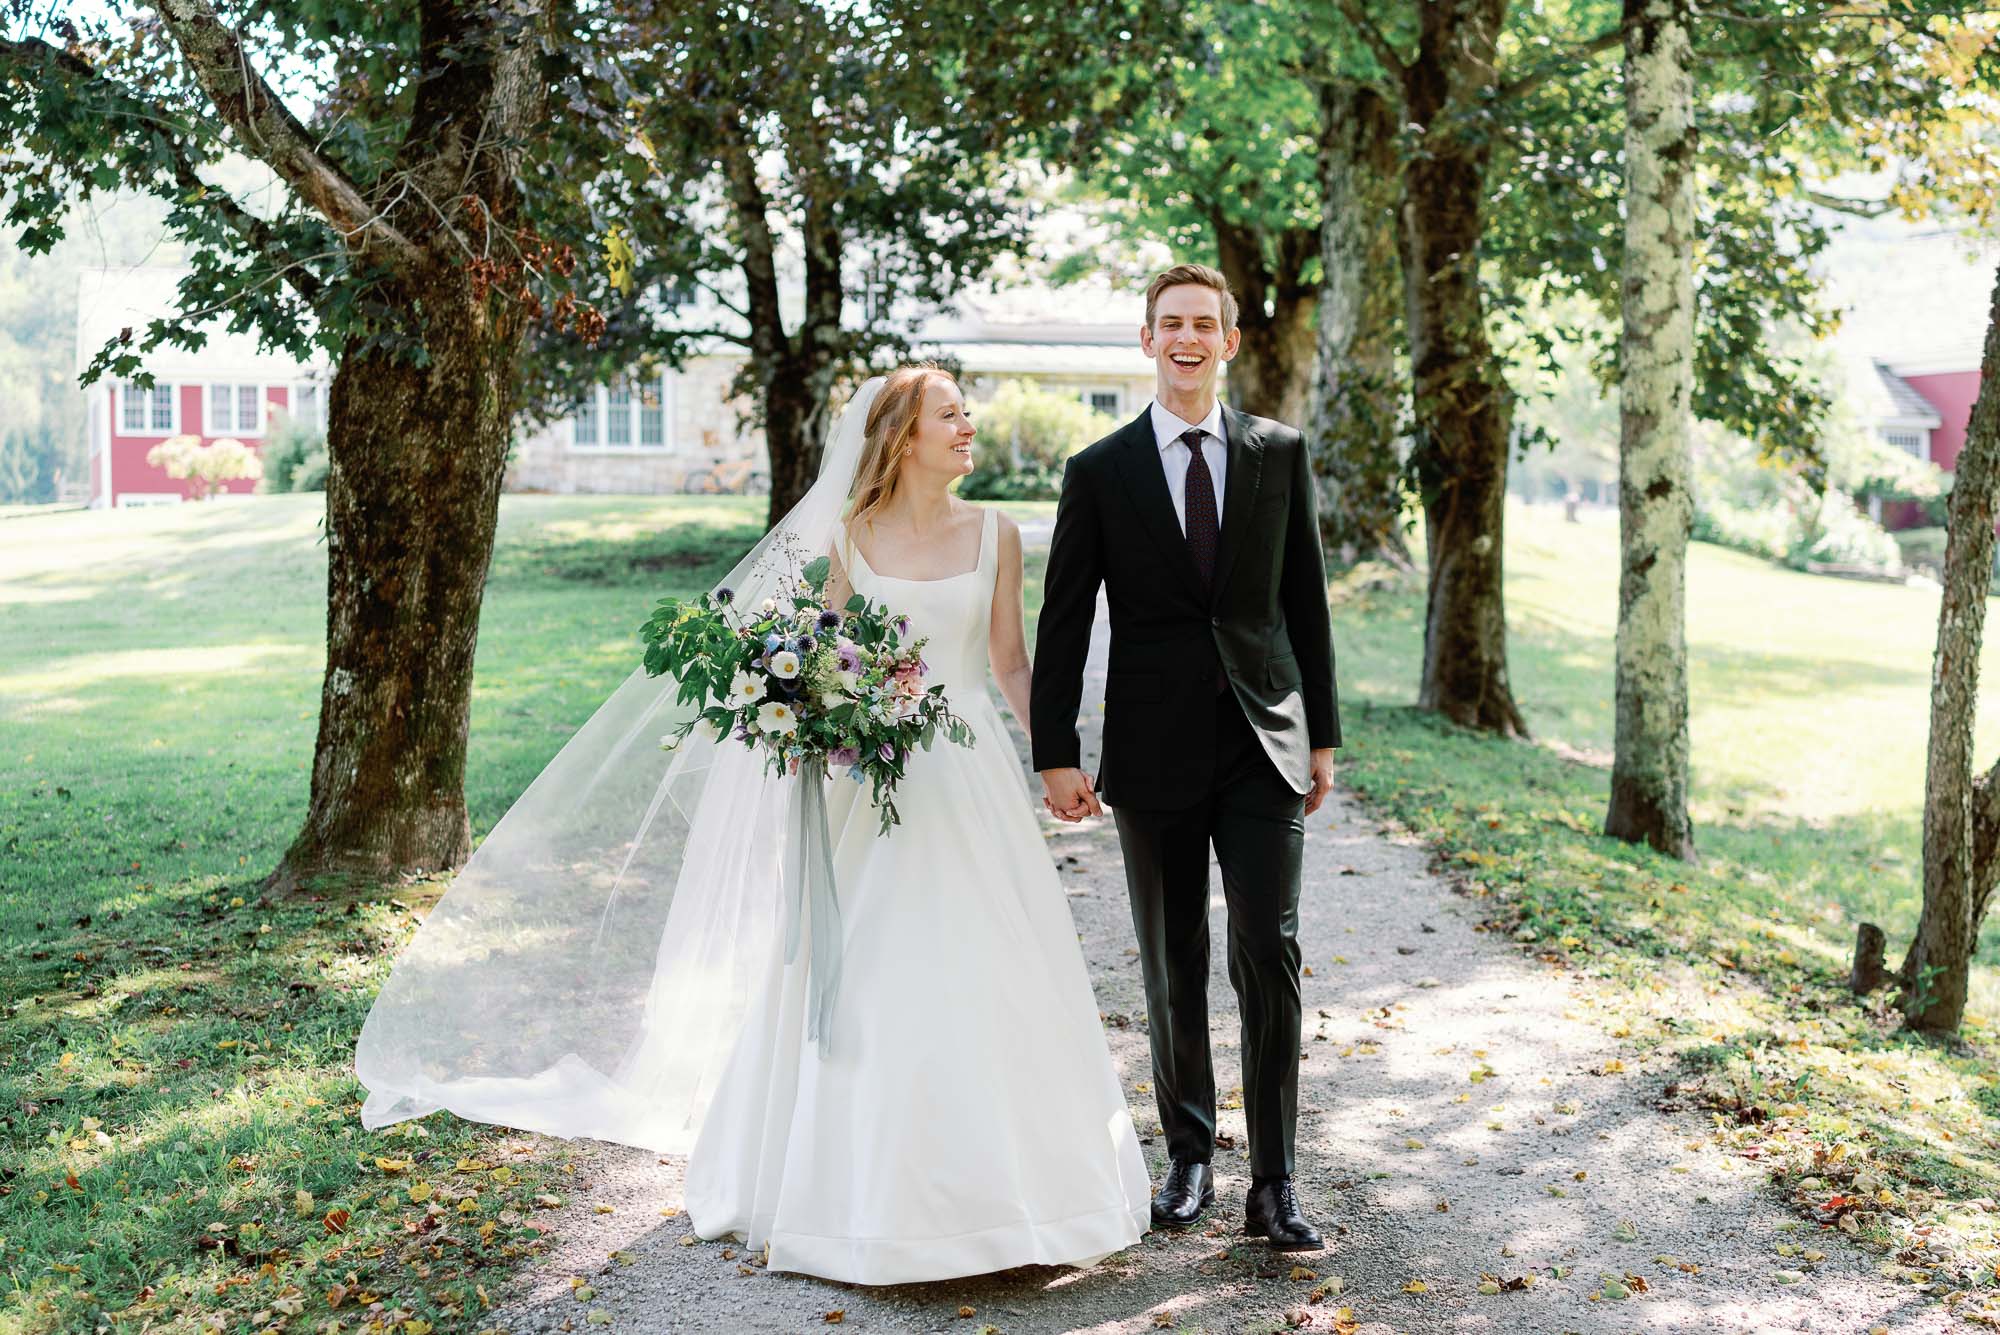 bride and groom at riverside farm wedding in vermont walk down forested pathway smiling and laughing